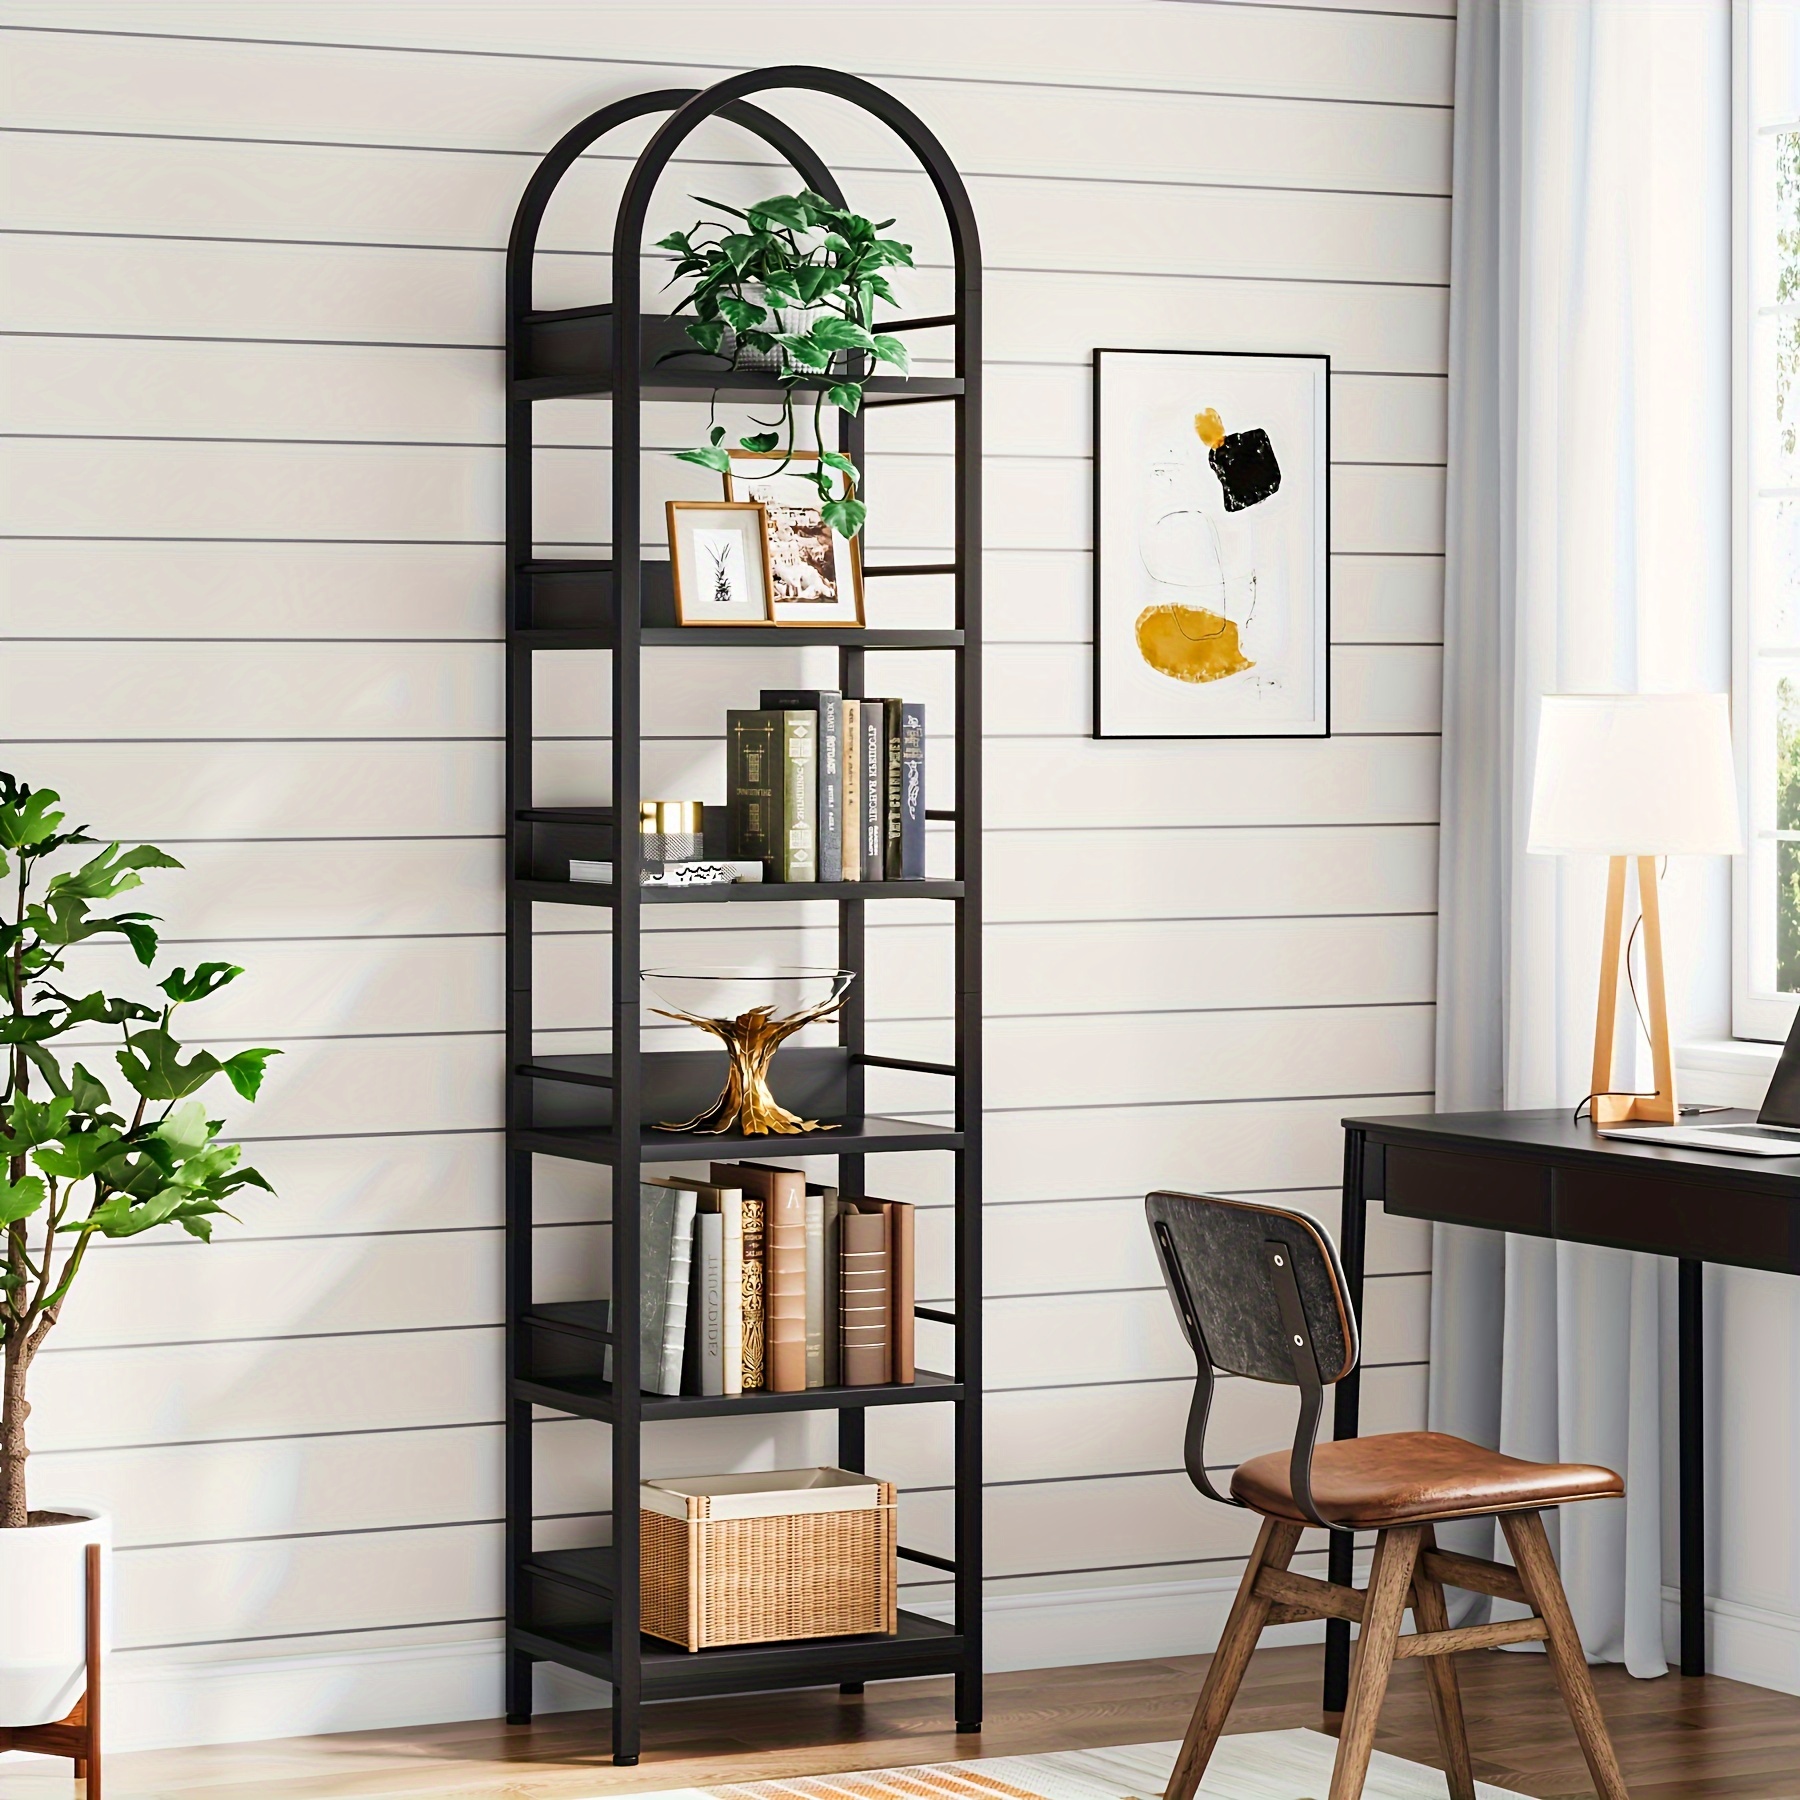 

Little Tree 6-tier Open Bookshelf, 78.7" Tall Arched Bookcase Narrow Bookshelf With Metal Frame, Freestanding Corner Bookcase Display Shelves For Living Room, Home Office